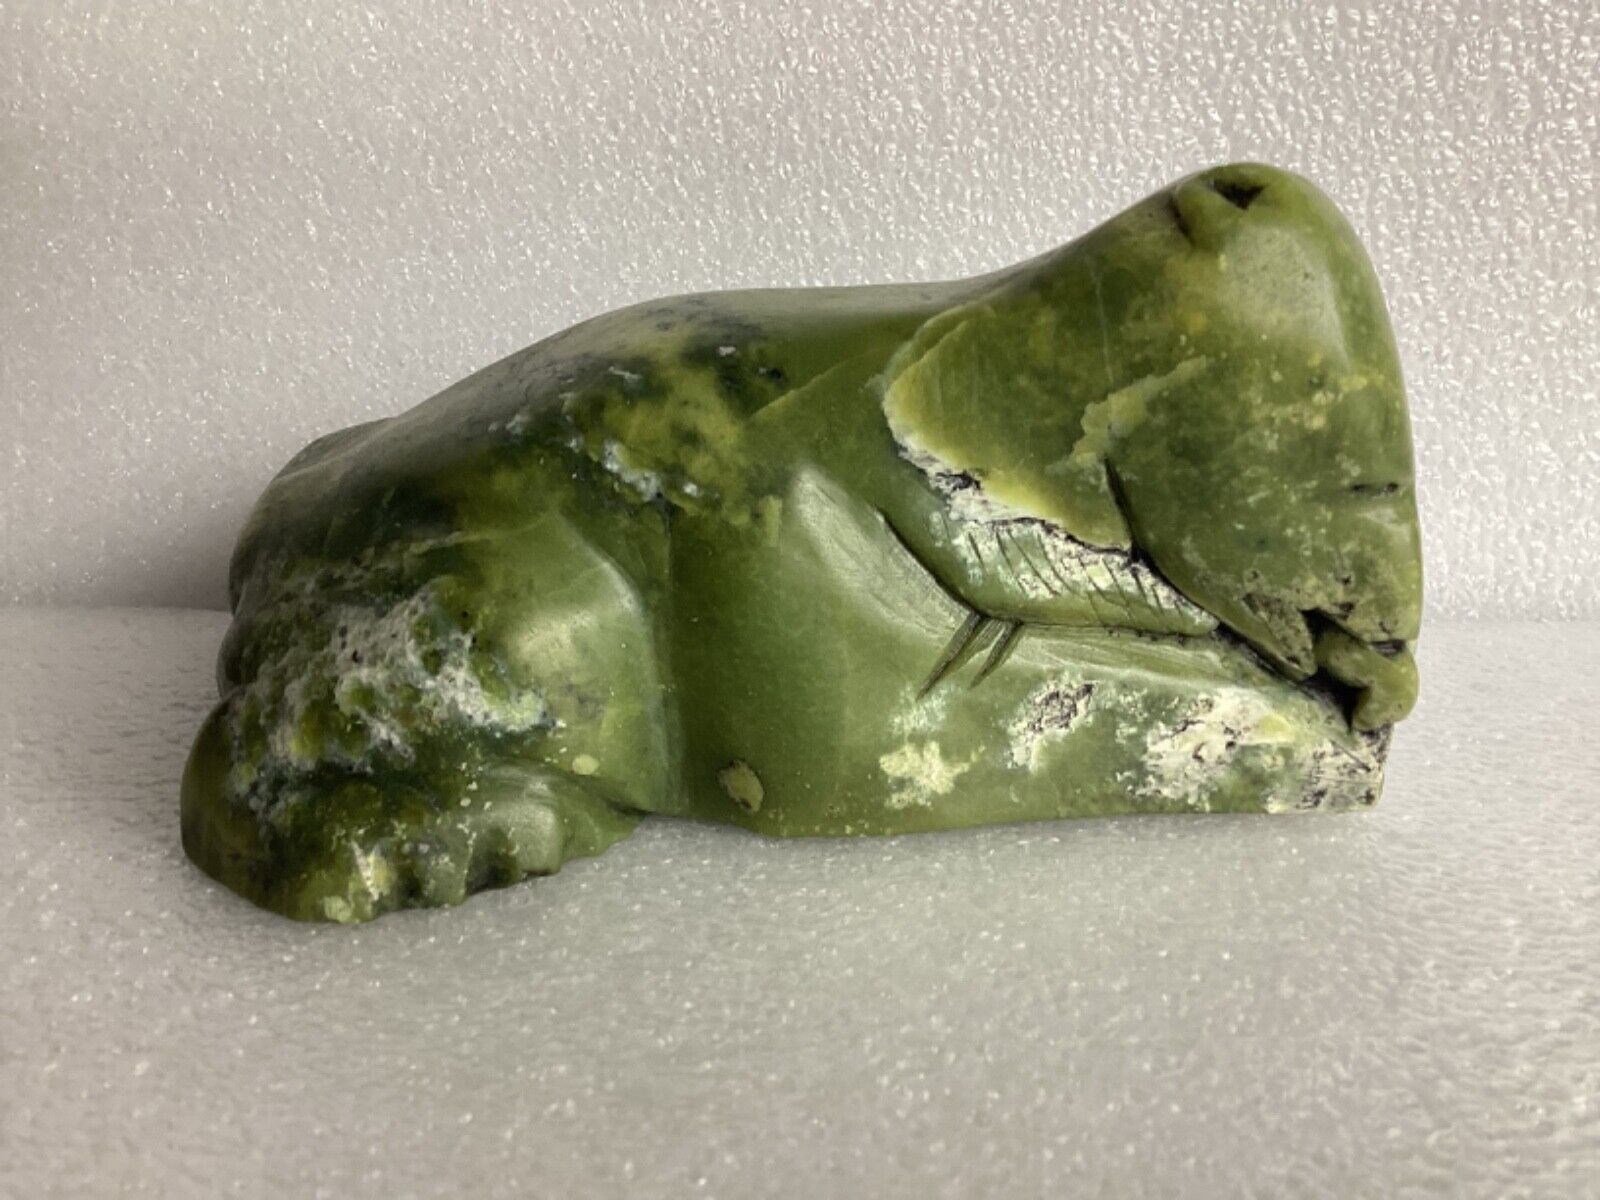 Large Inuit carving of bear eating a fish